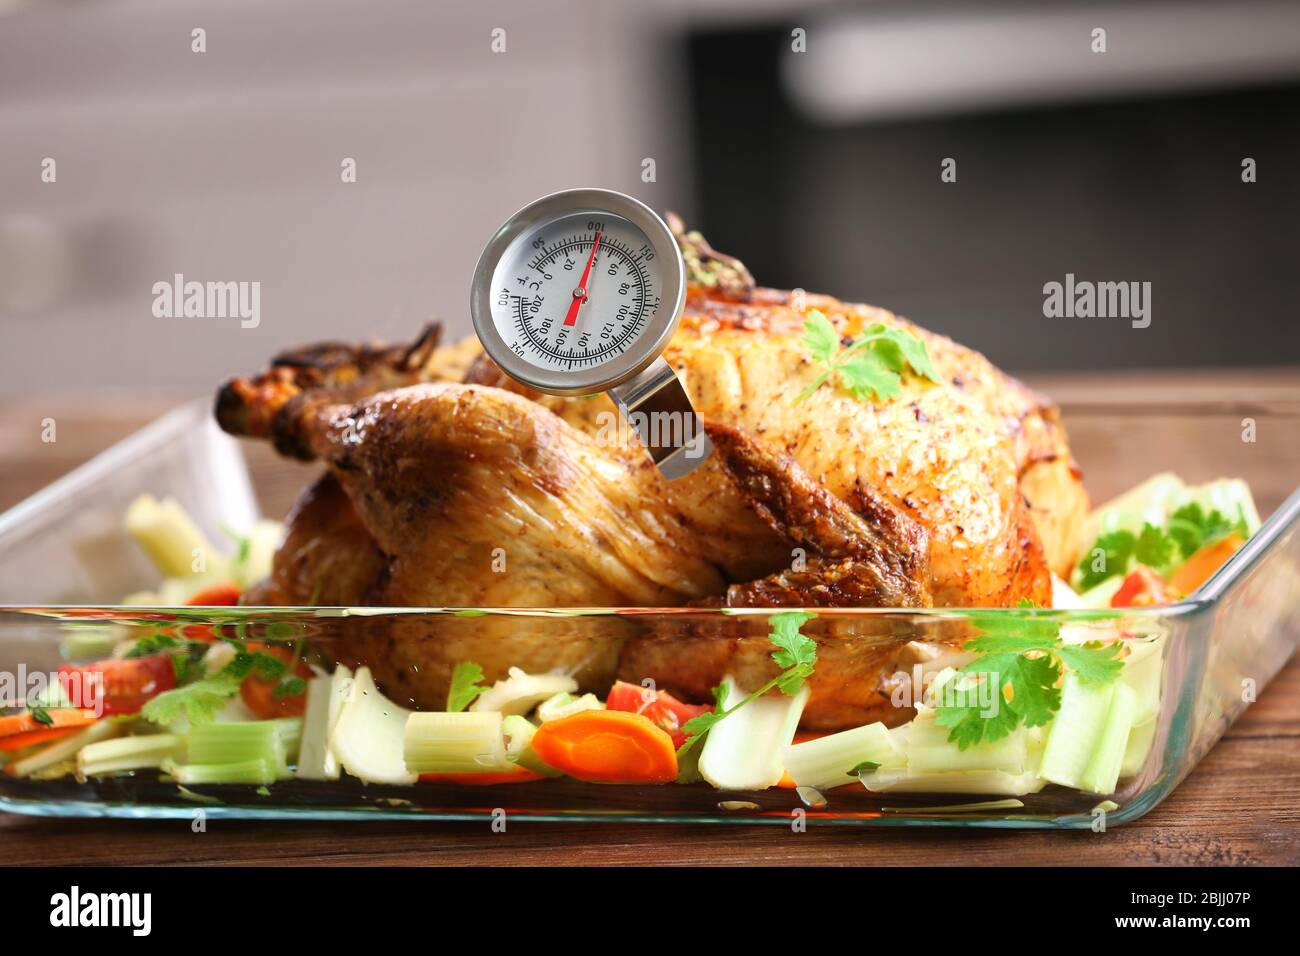 https://c8.alamy.com/comp/2BJJ07P/golden-roasted-turkey-with-meat-thermometer-on-table-2BJJ07P.jpg